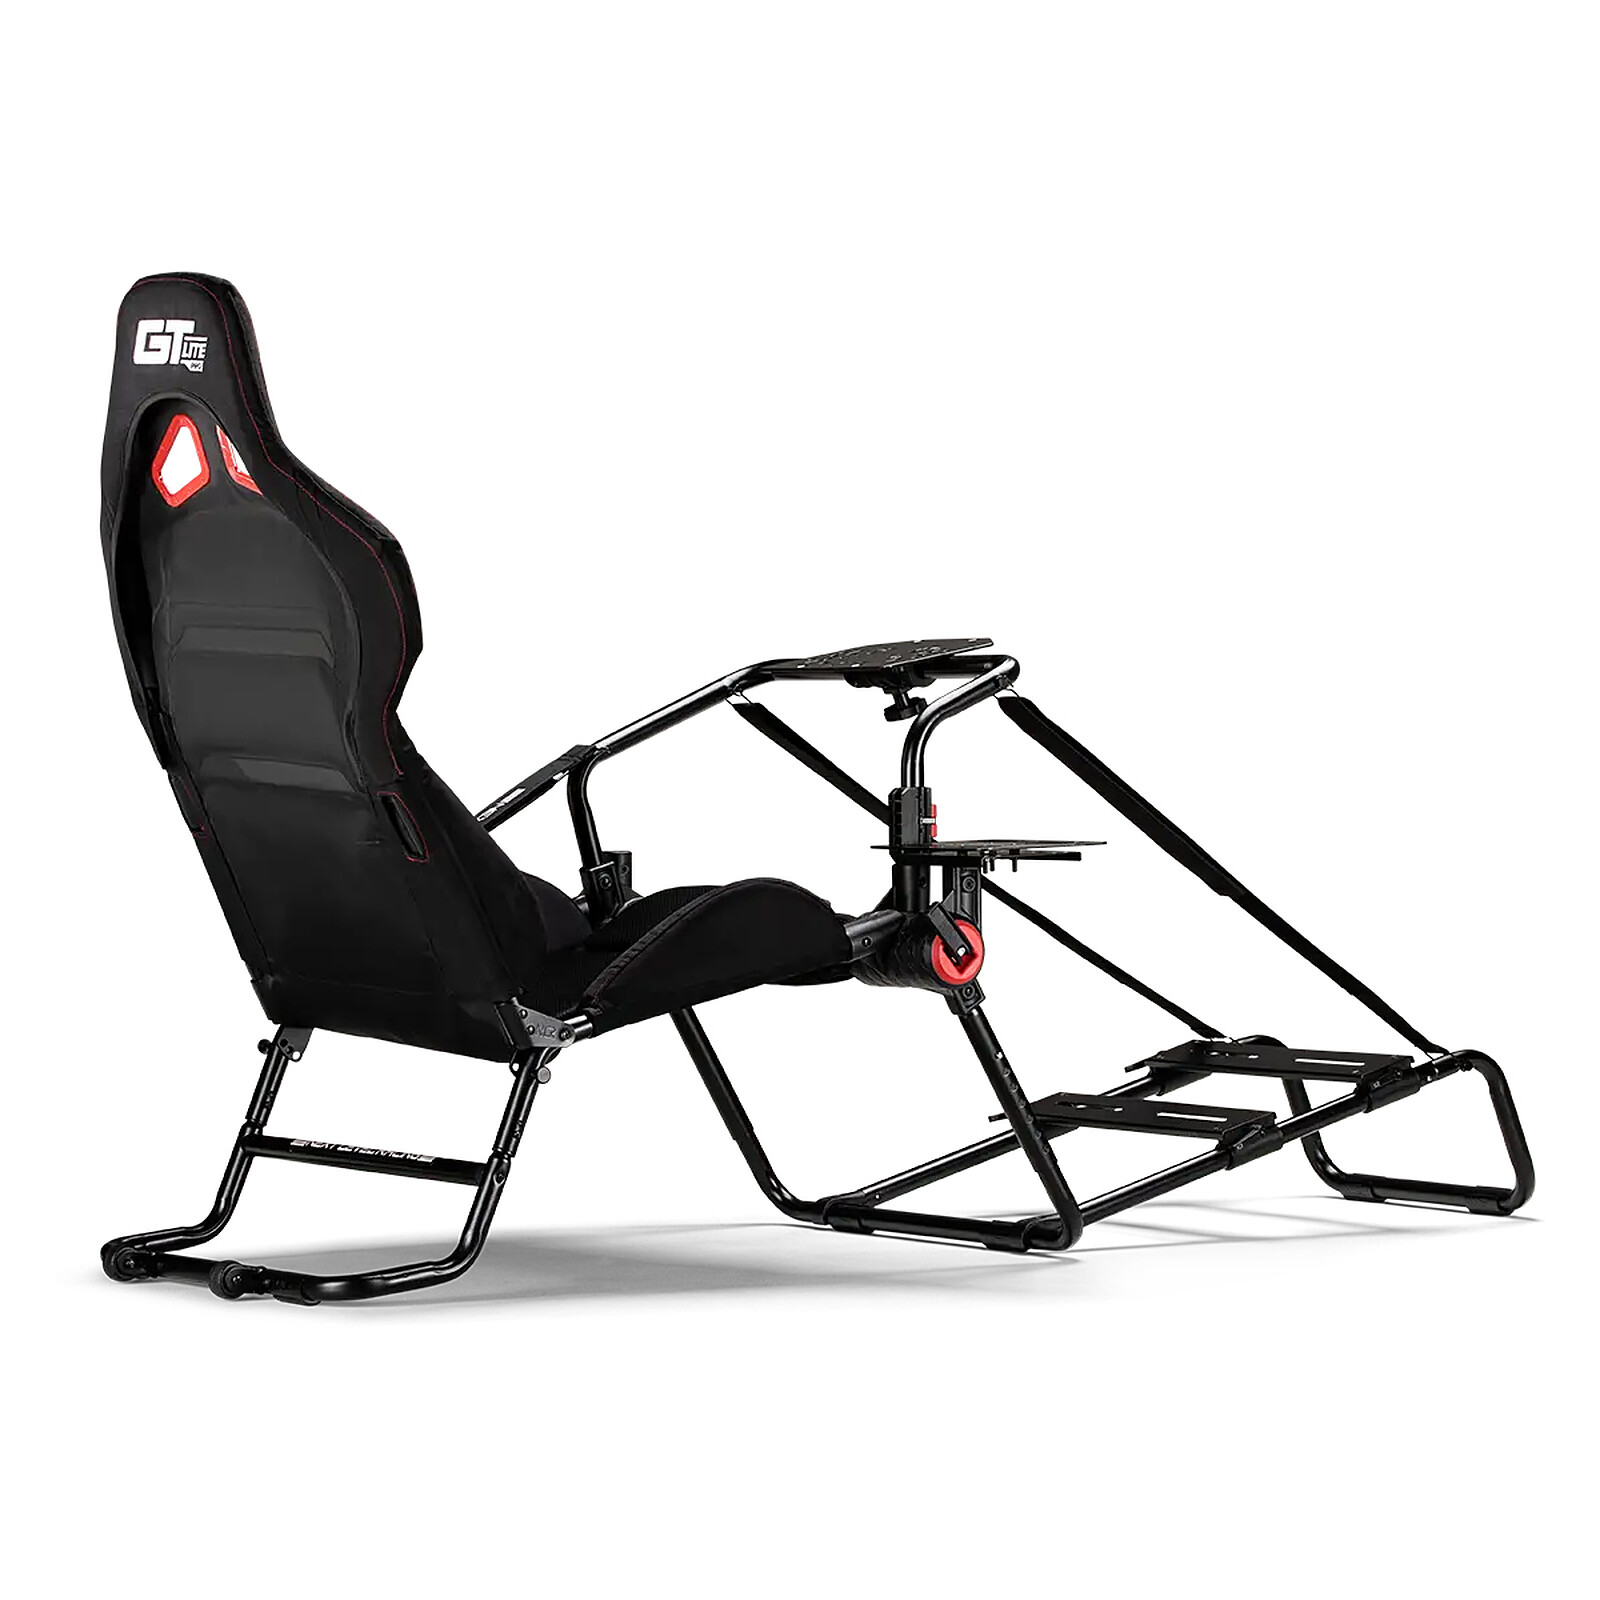 Next Level Racing GT Lite Pro - Other gaming accessories - LDLC 3-year  warranty